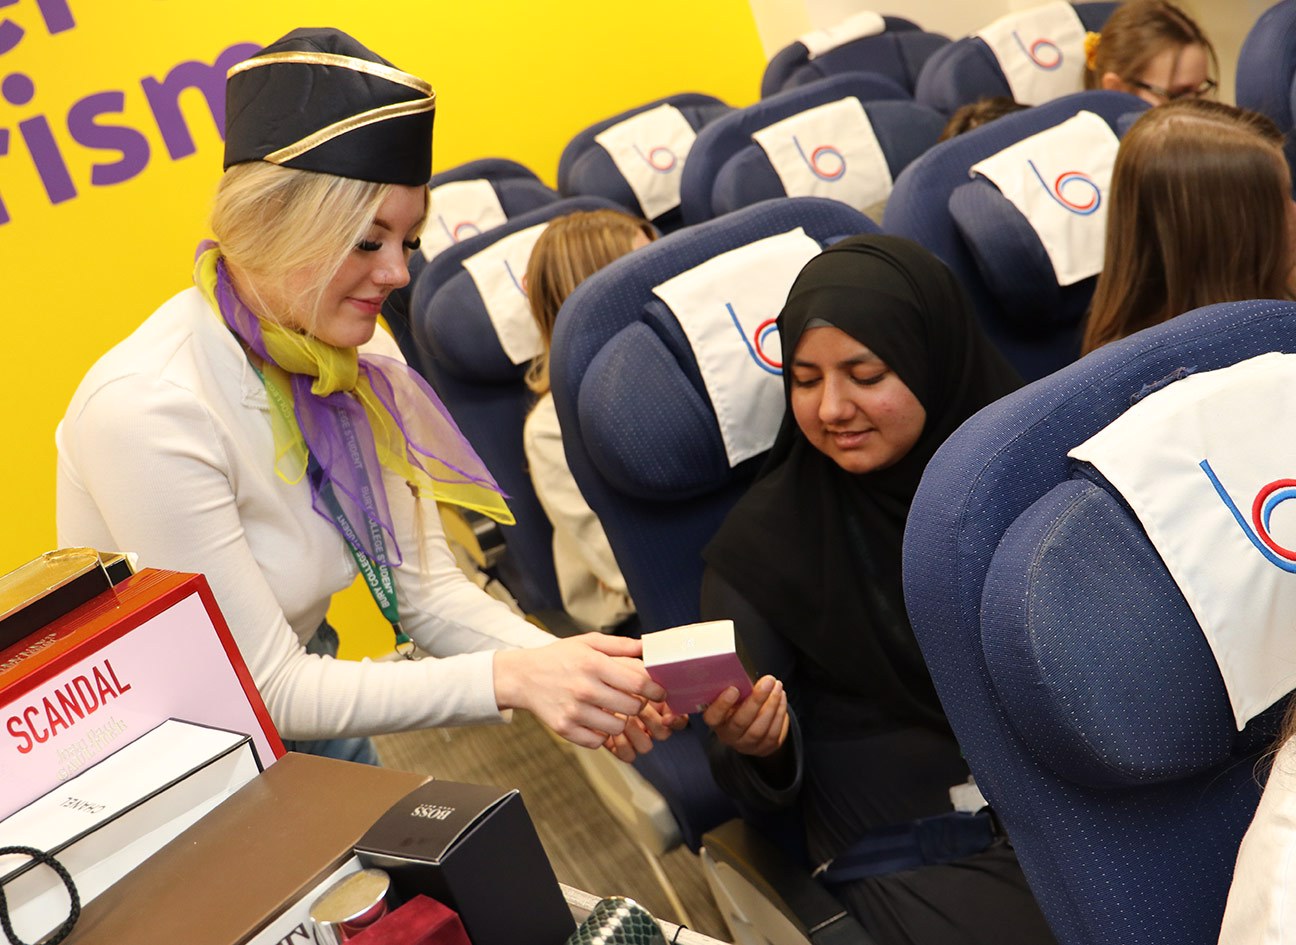 Travel student selling items on a mock plane